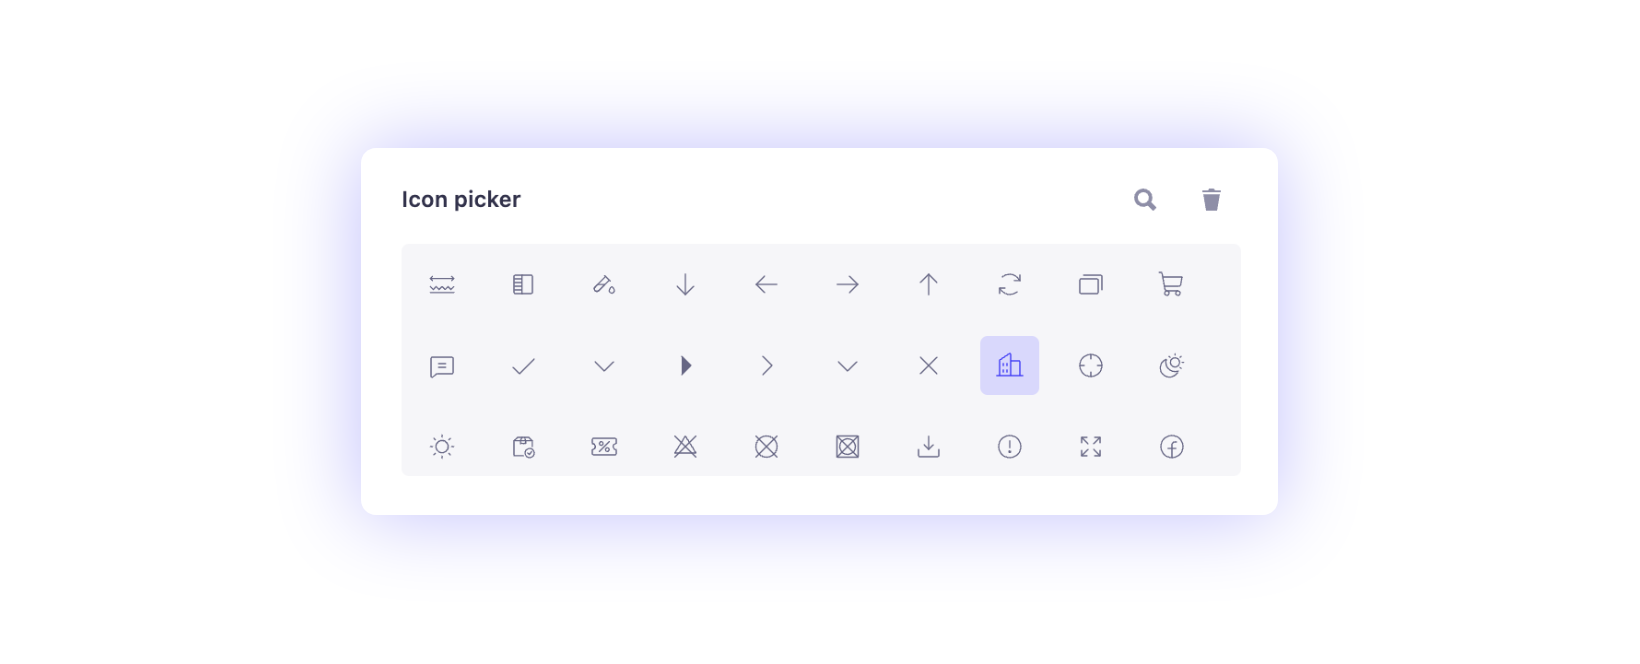 Icon picker custom field preview. Features a grid of icons.